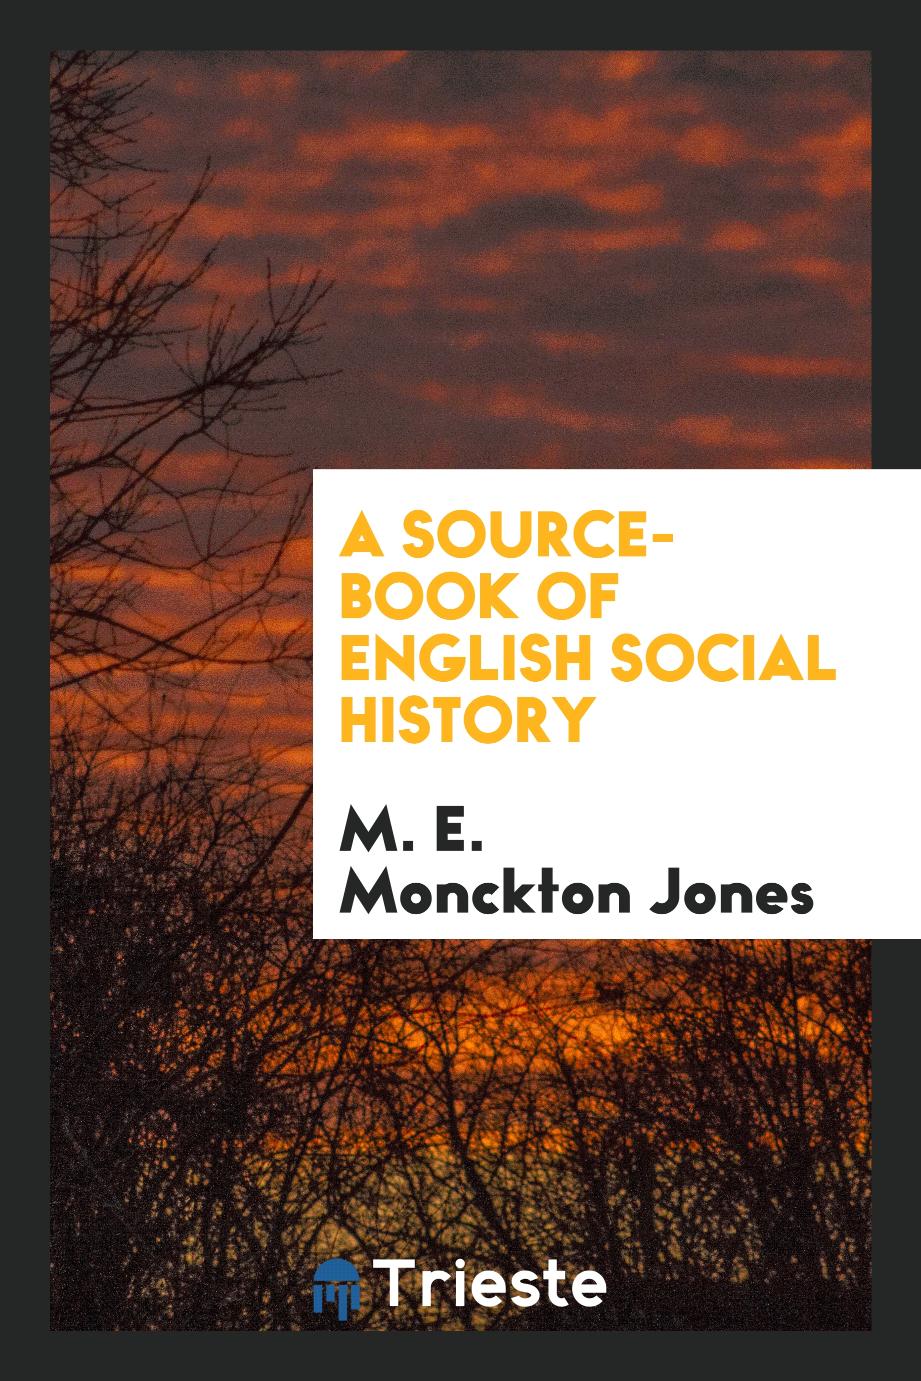 A source-book of English social history